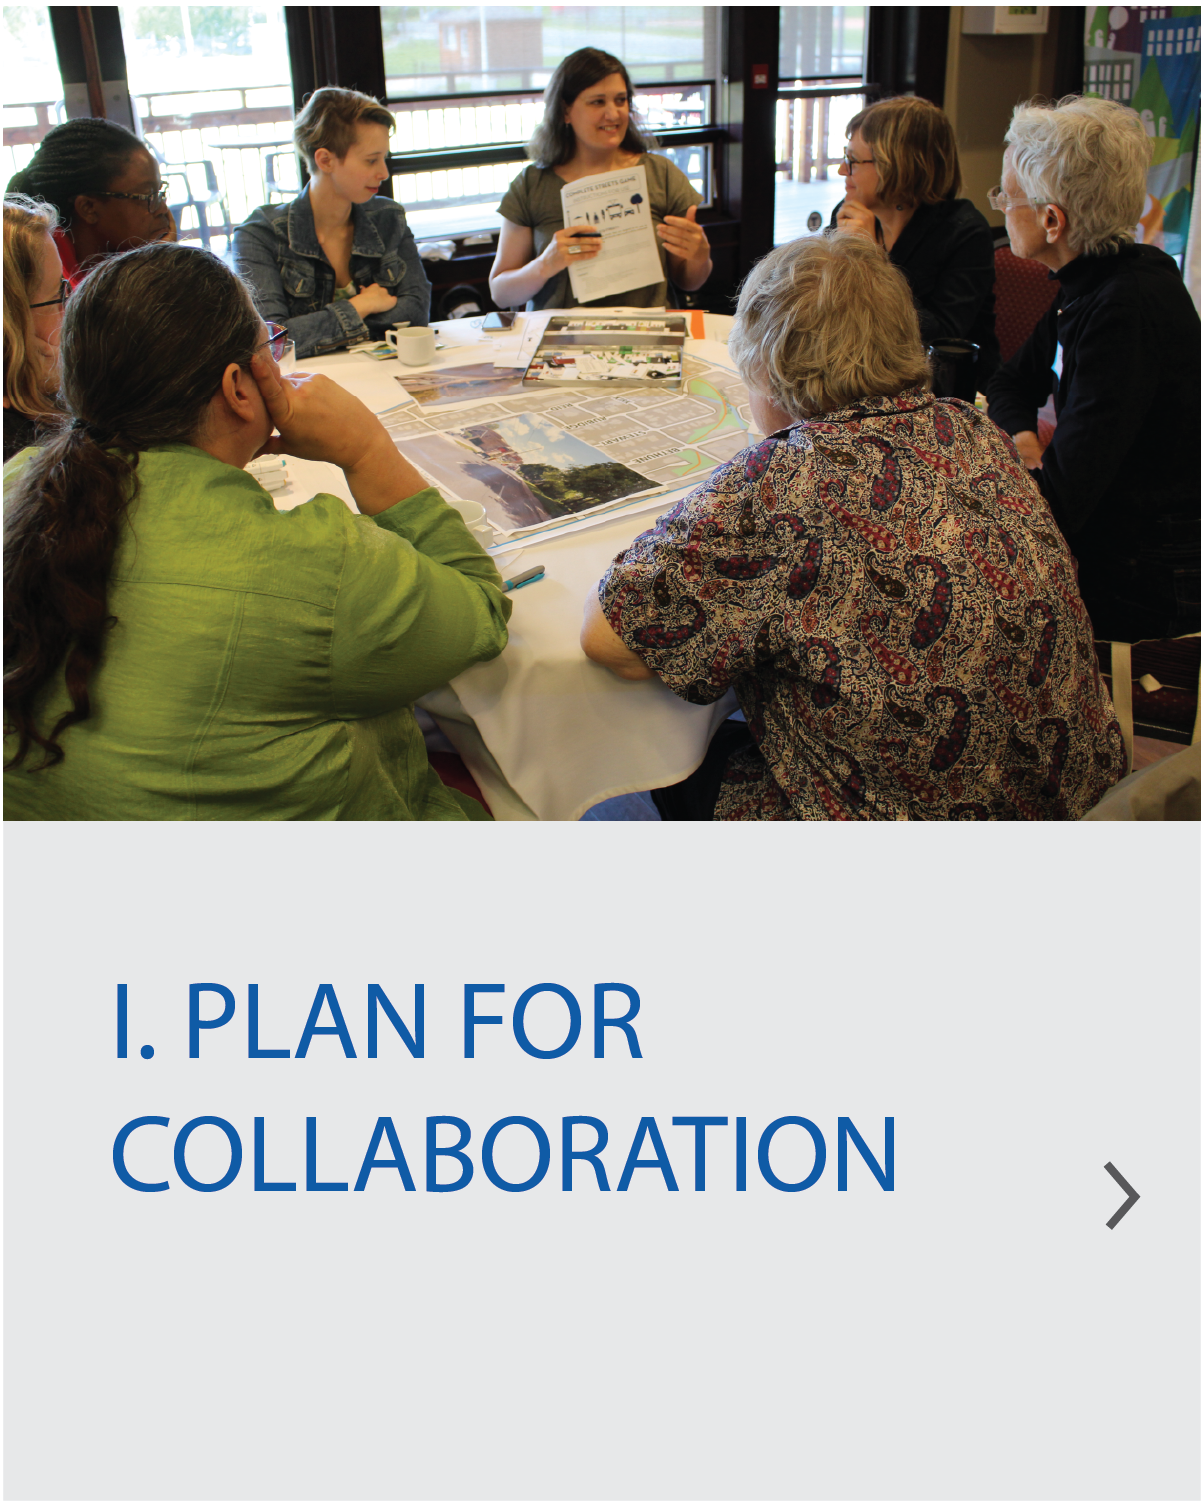 1. Plan for Collaboration